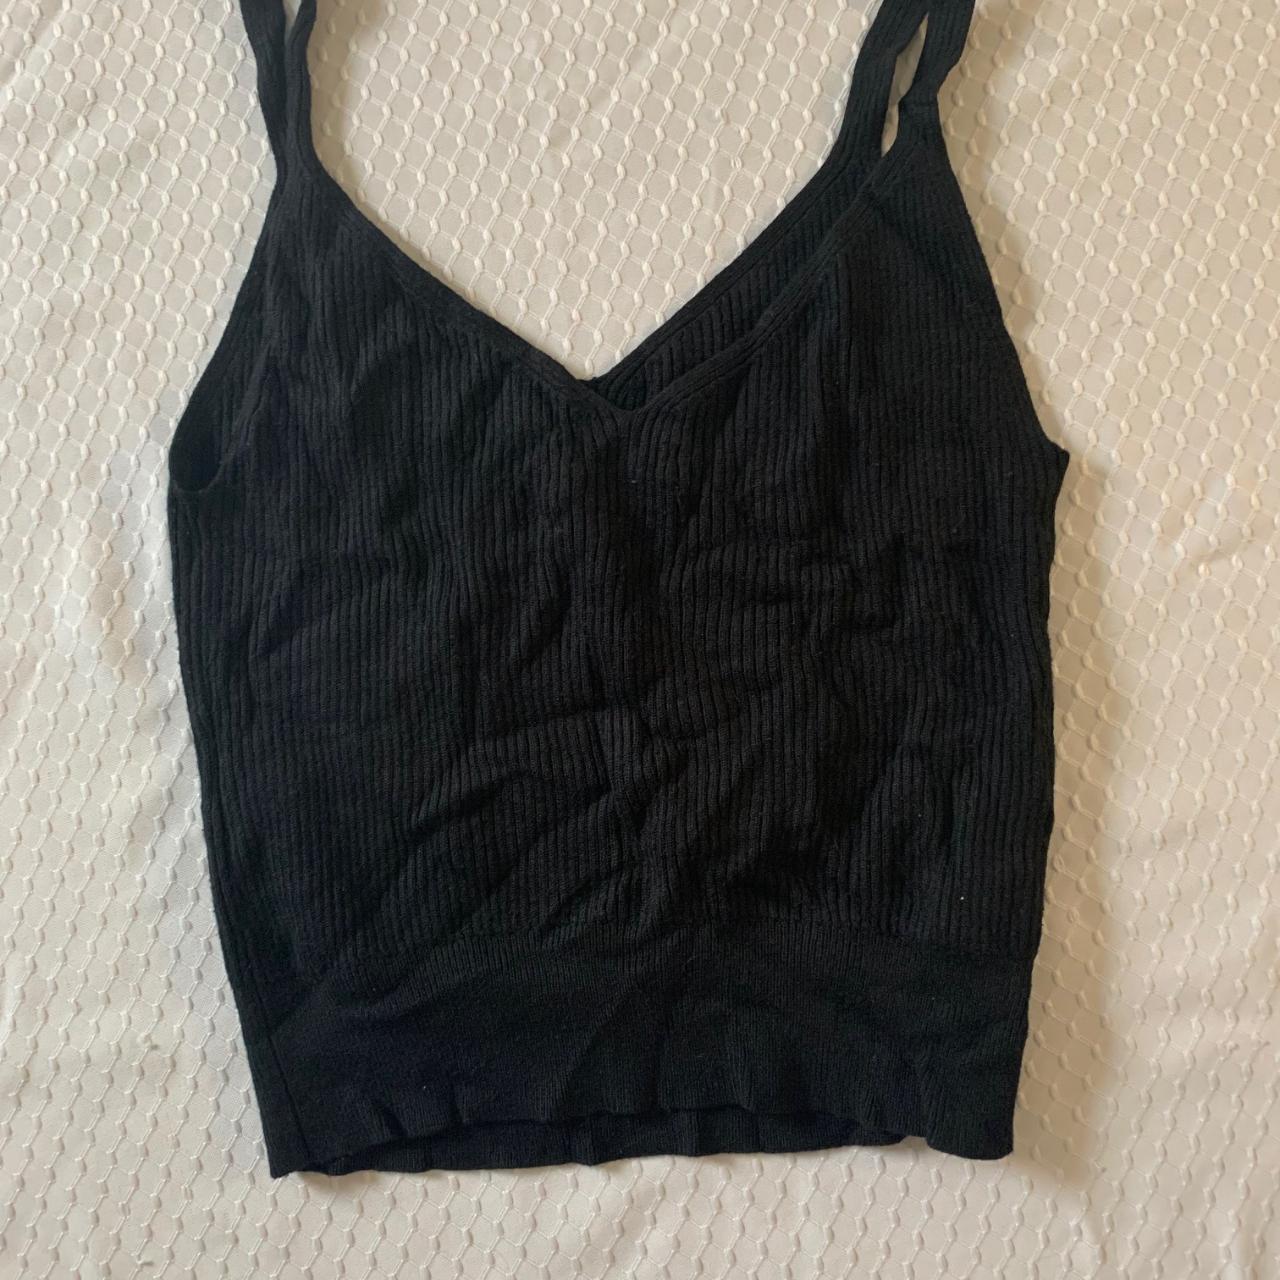 Abercrombie & Fitch blank ribbed knit tank top. Size... - Depop